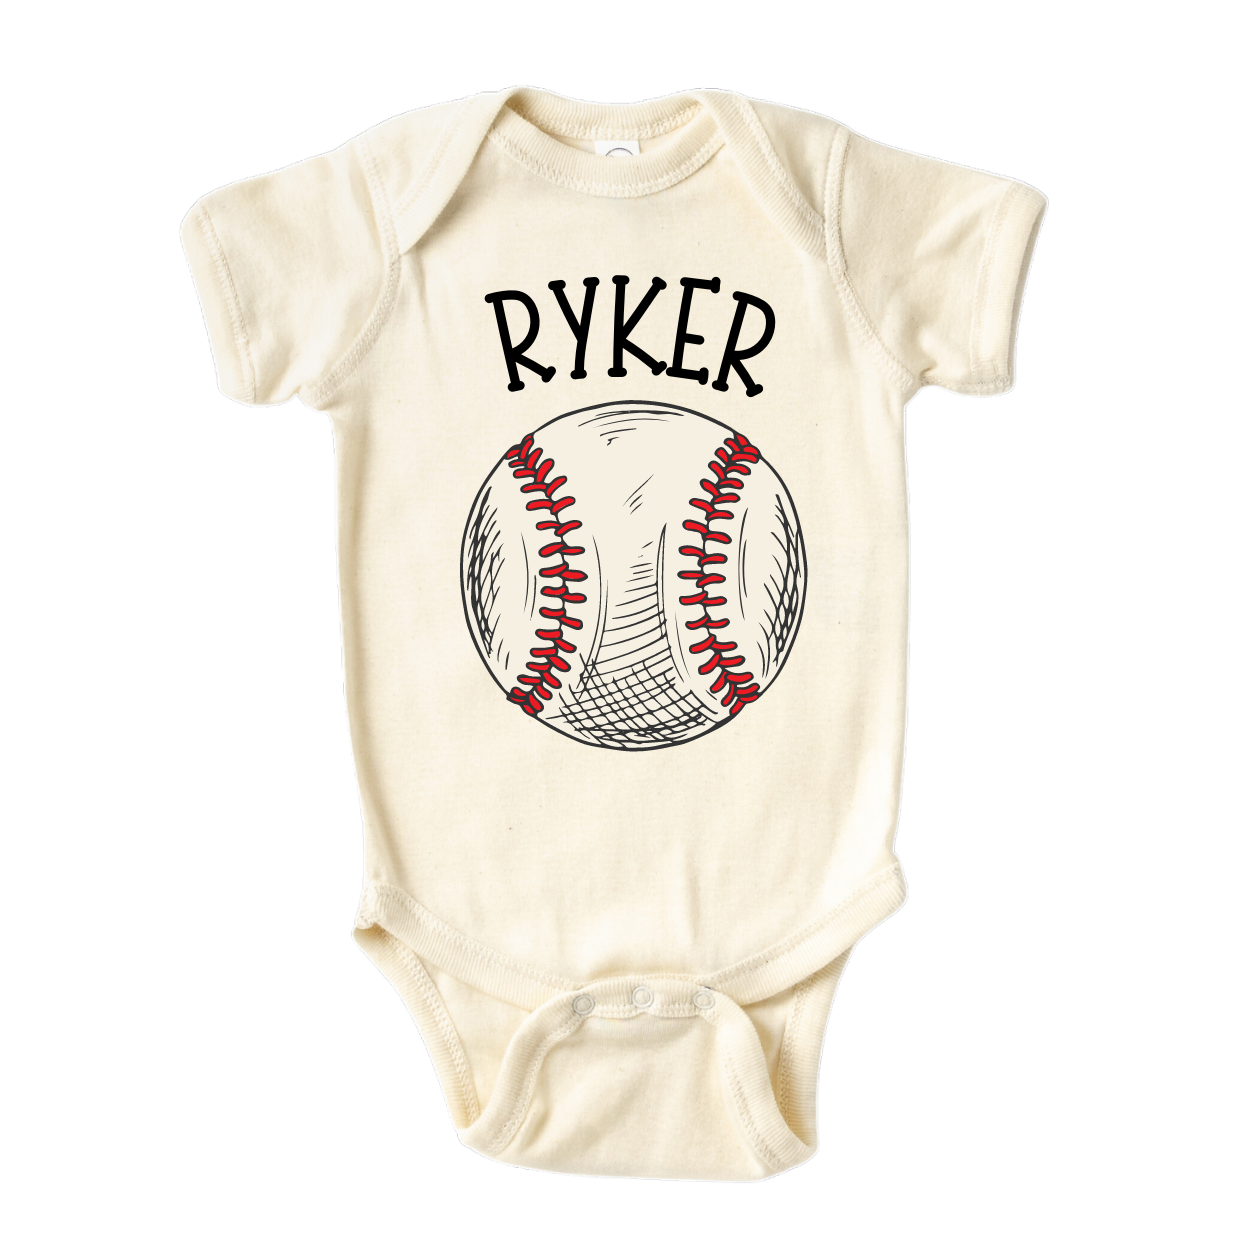 Natural Baby Bodysuit with a cute printed design of a baseball, customizable with a name option.